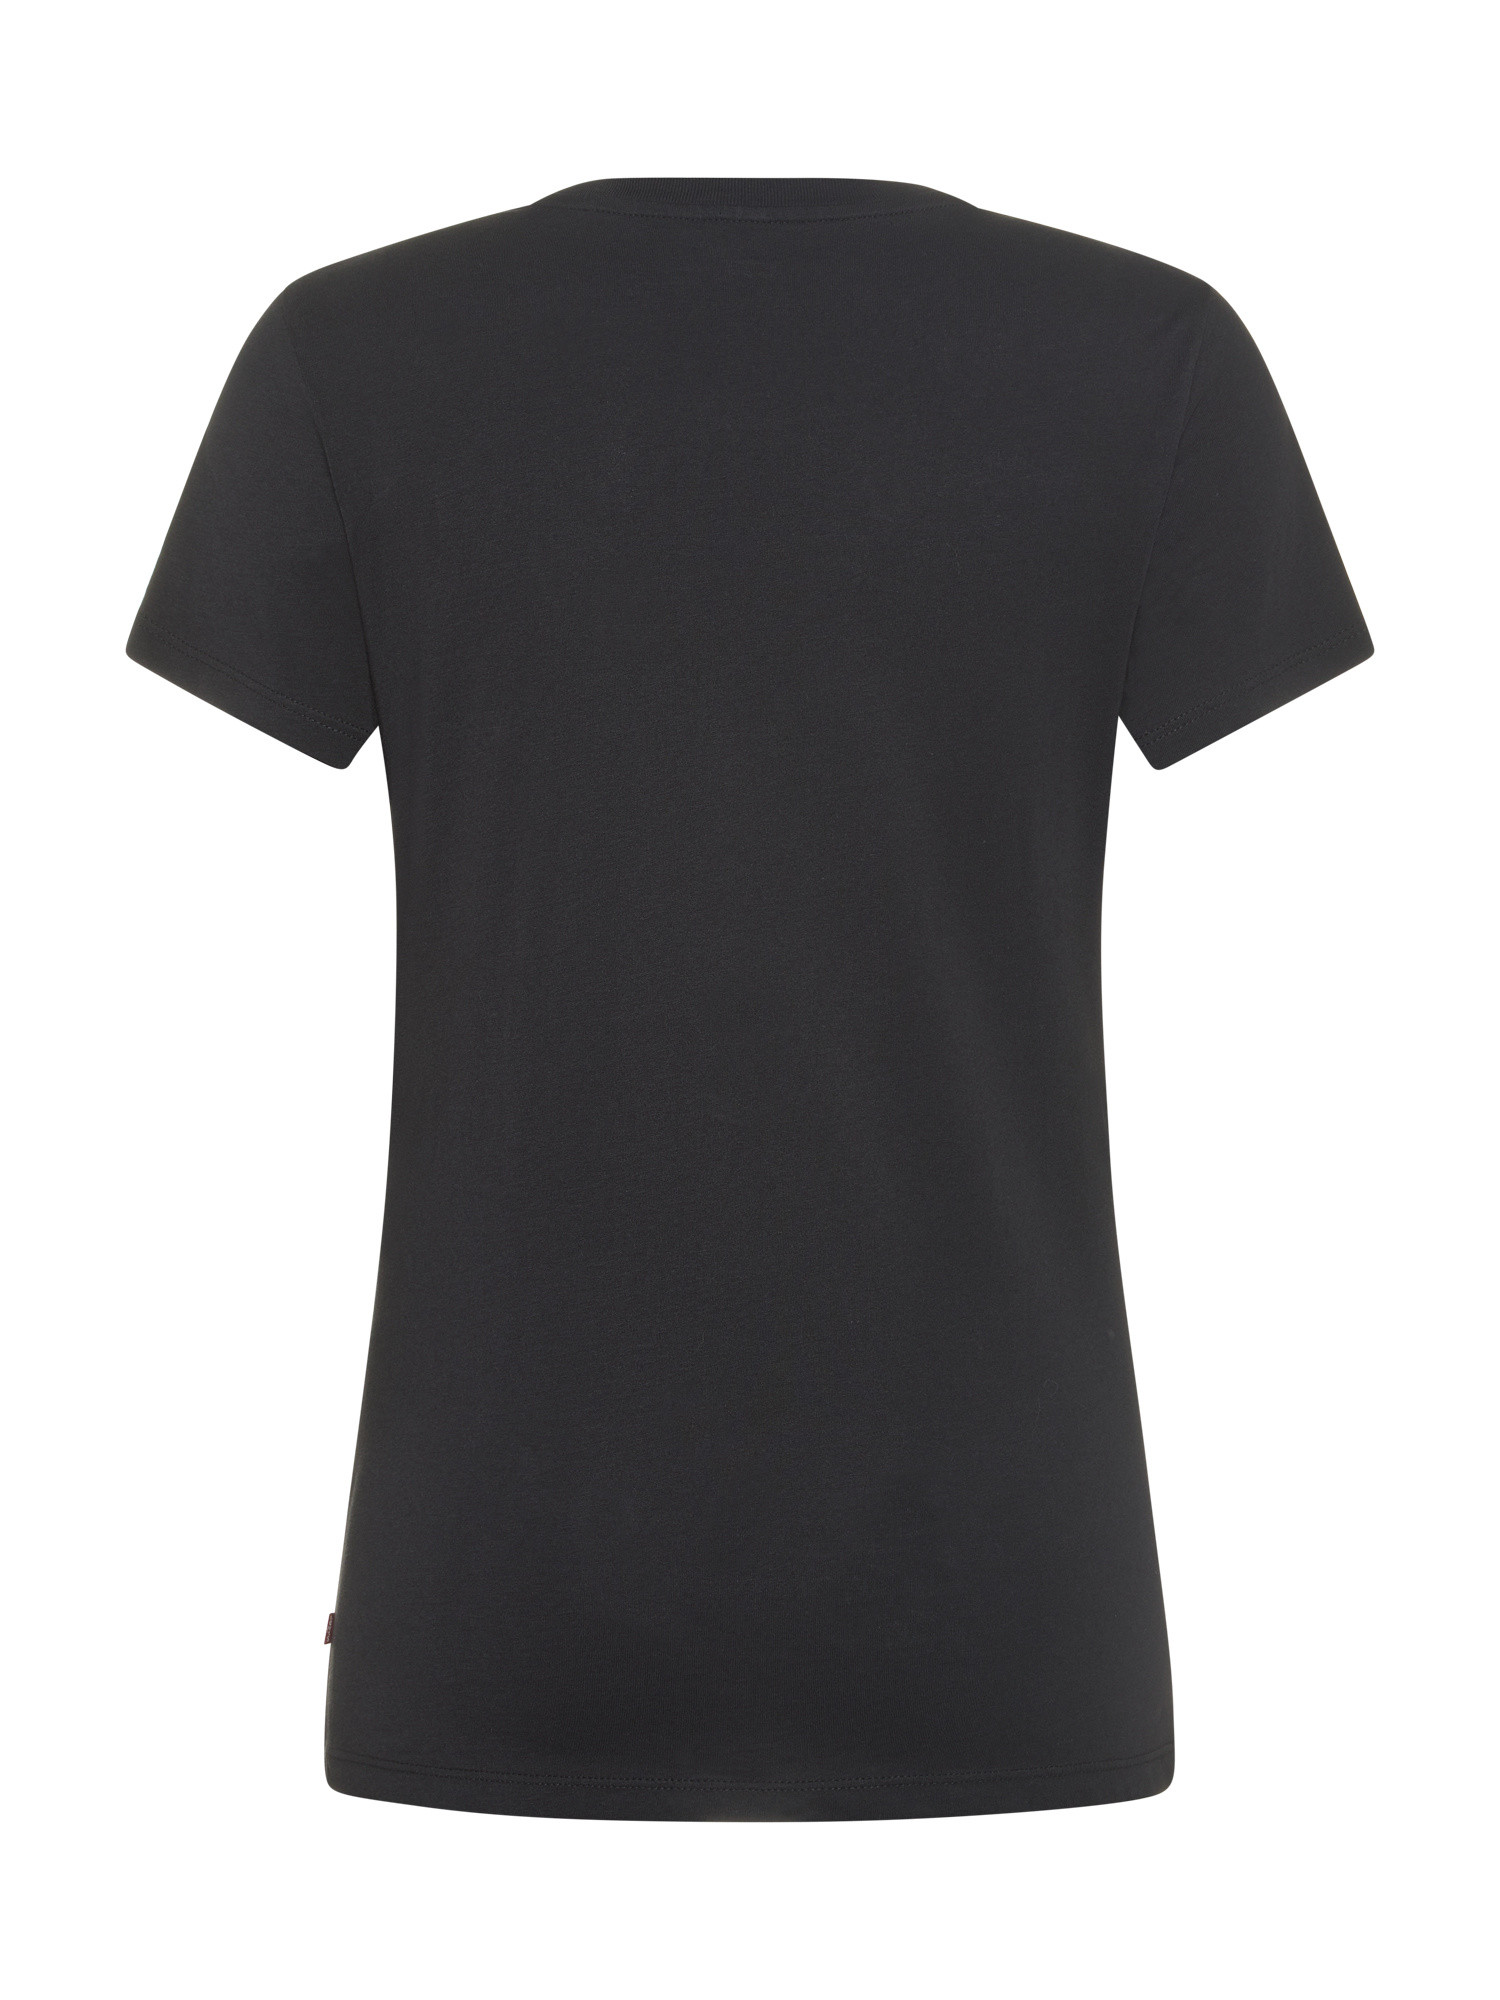 T-shirt Perfect Tee, Nero, large image number 1